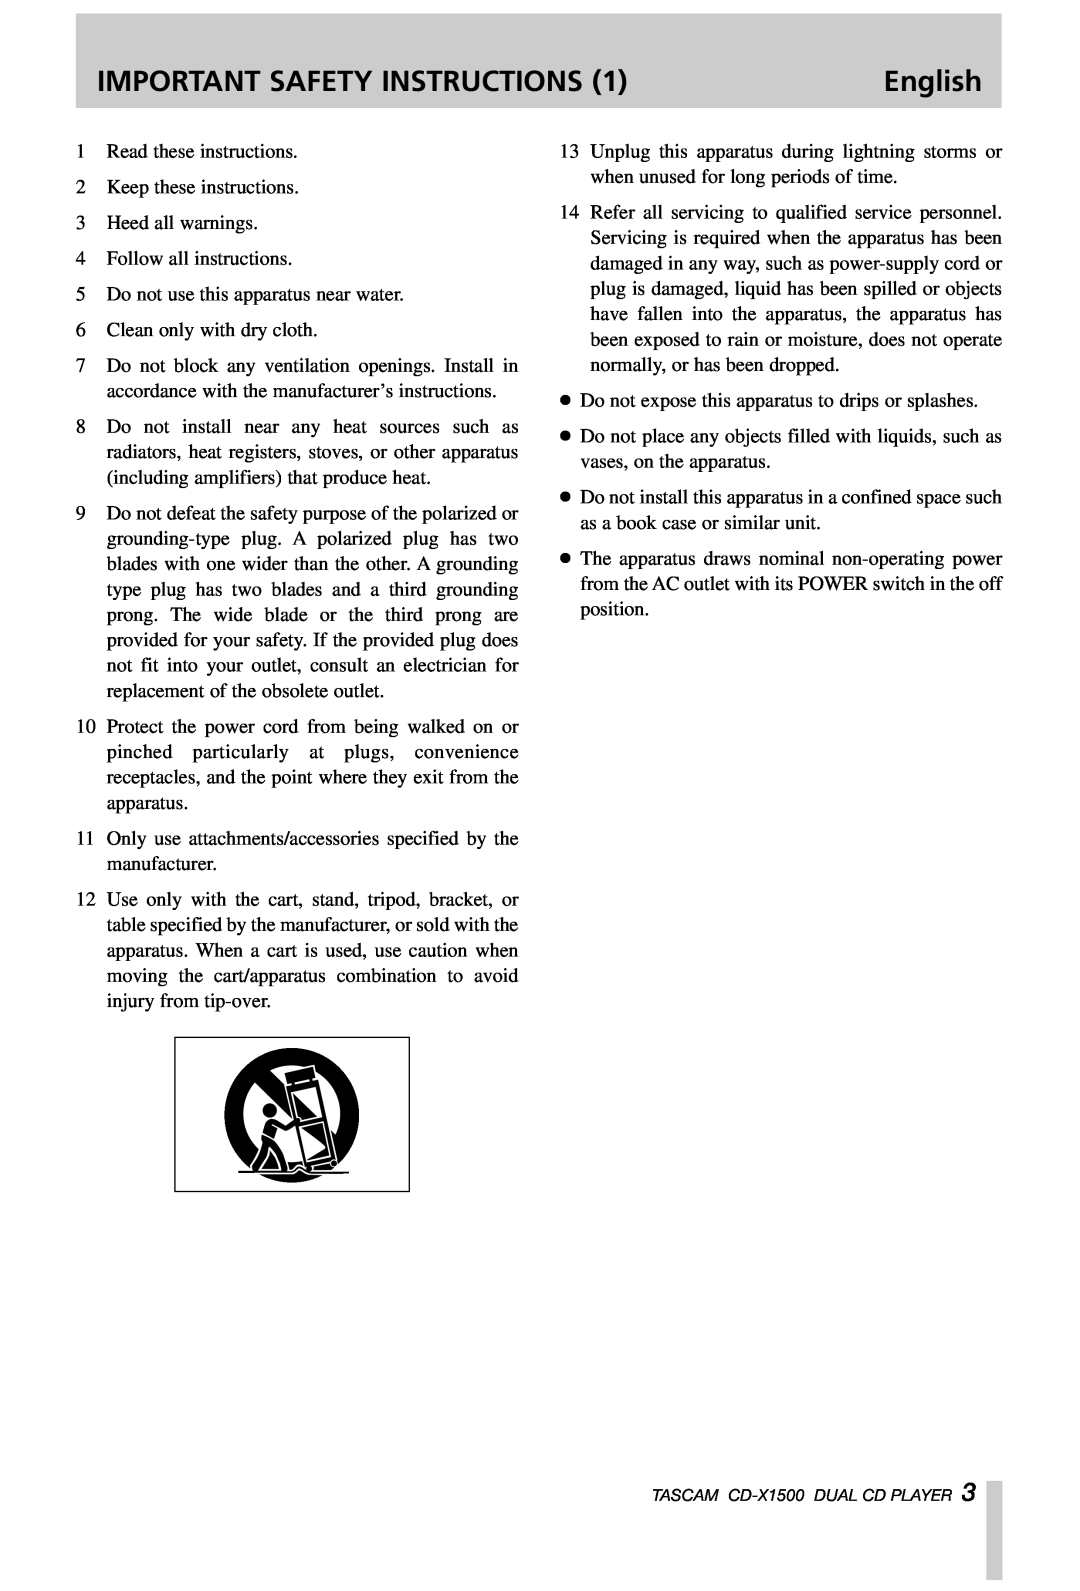 Tascam CD-X1500 owner manual Important Safety Instructions, English, Read these instructions 2 Keep these instructions 